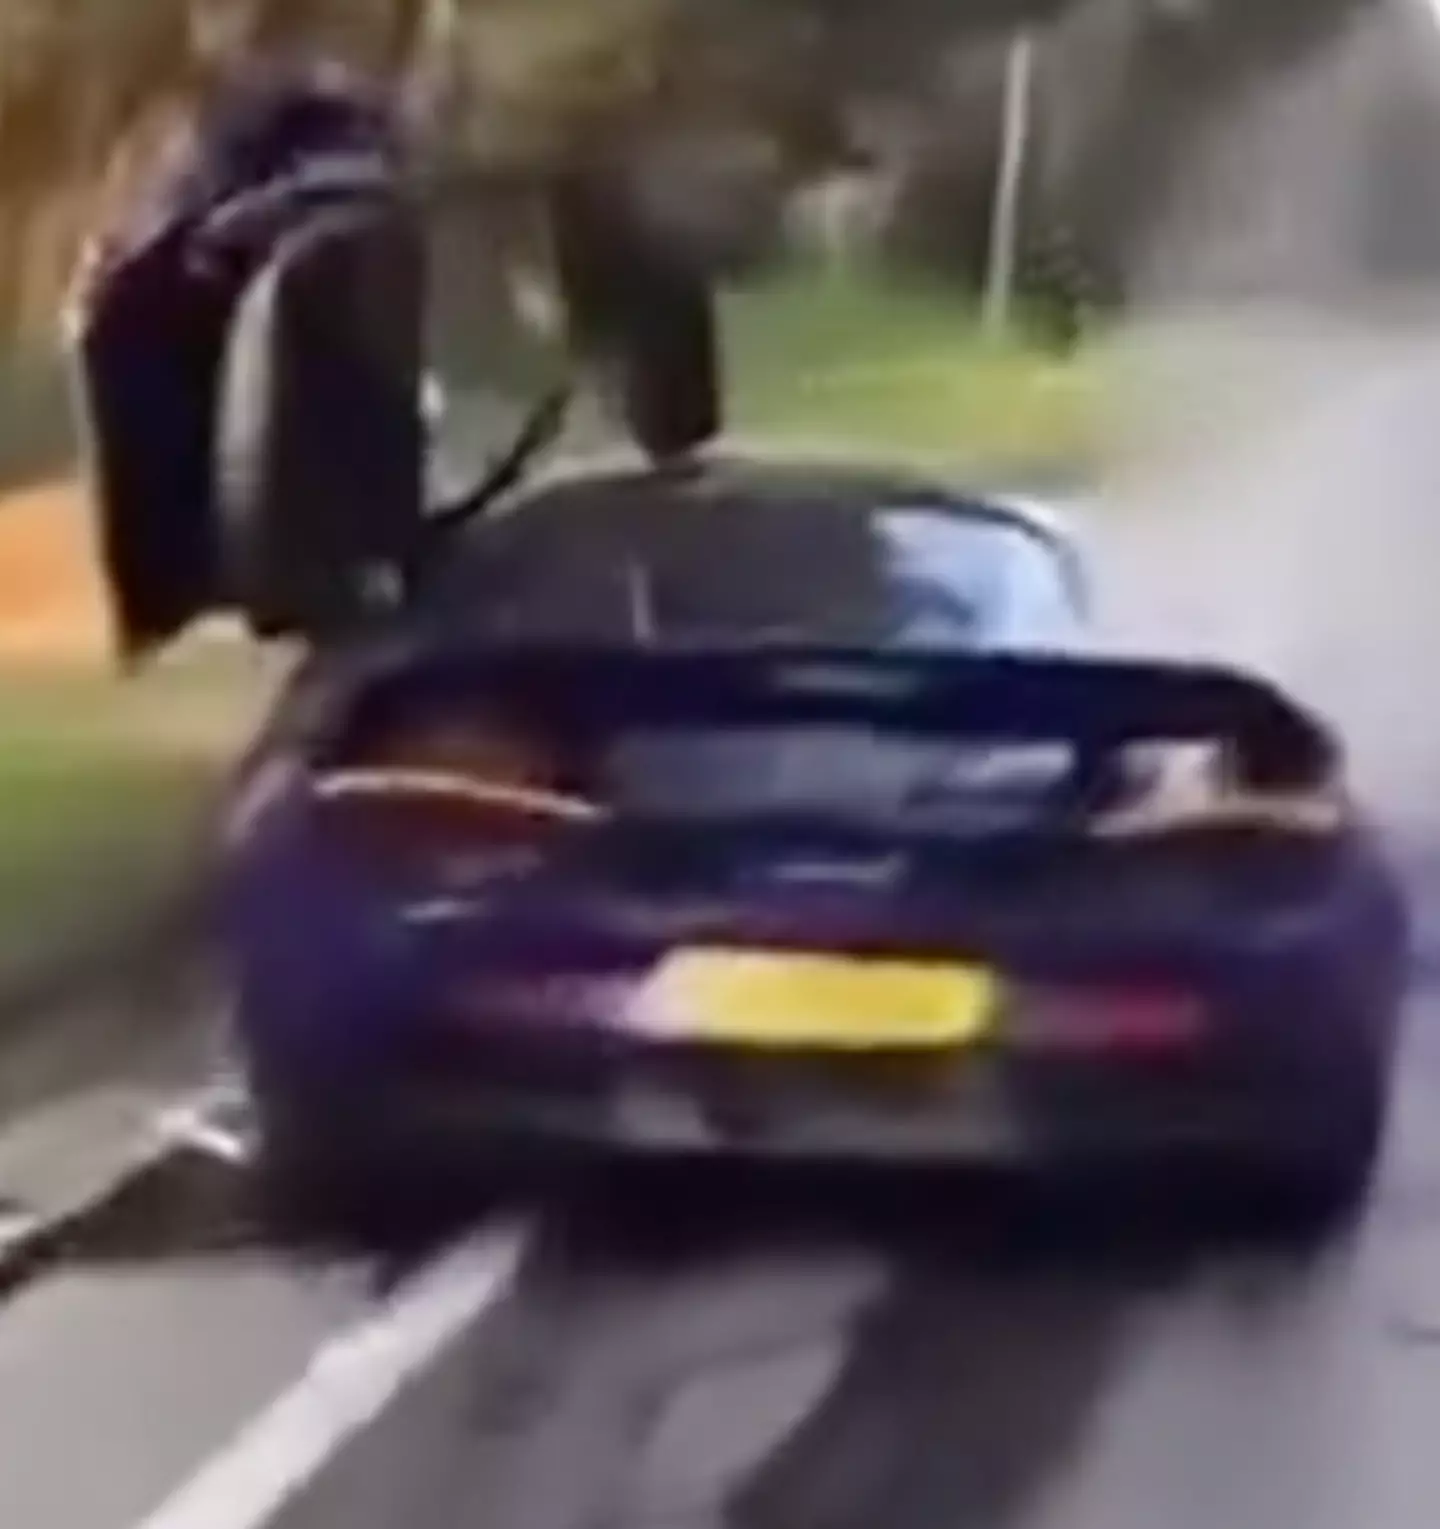 Police are appealing for witnesses after the driver of a purple McLaren that collided with another vehicle has fled the scene.